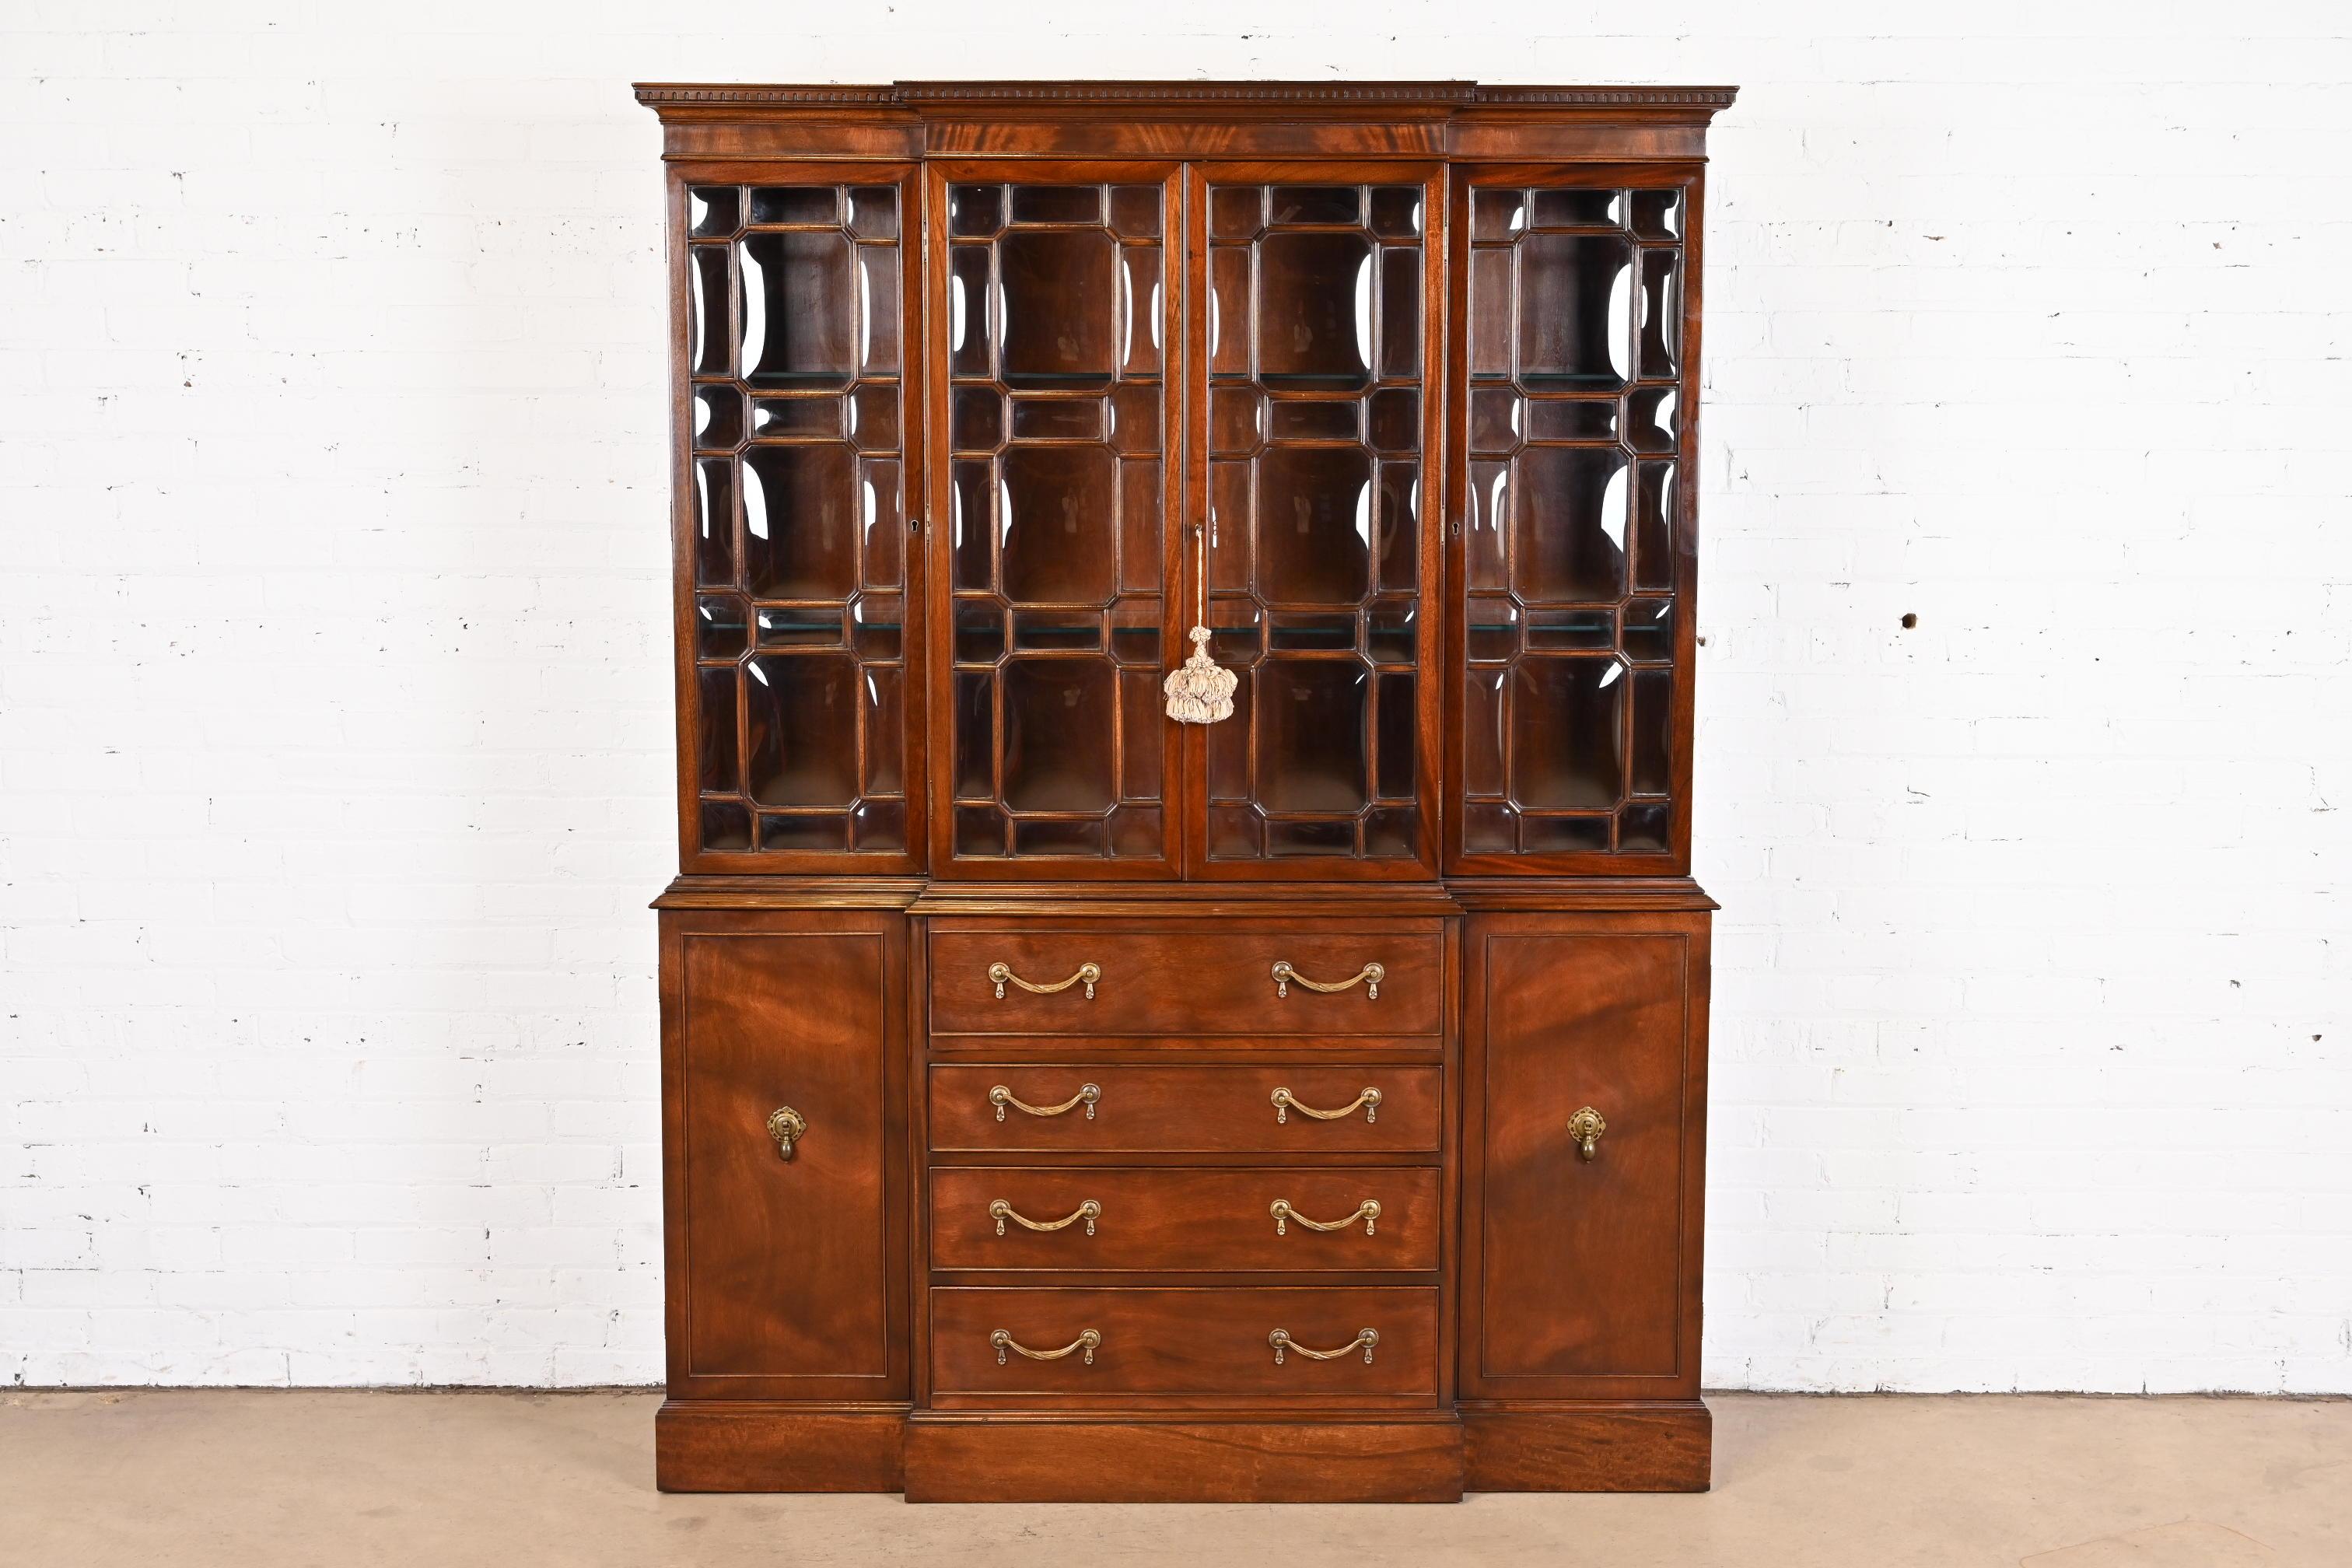 A gorgeous Georgian or Chippendale style breakfront bookcase or dining cabinet.

In the manner of Baker Furniture

USA, Late 20th century

Beautiful flame mahogany, with mullioned bubble glass front doors, embossed leather writing surface, and